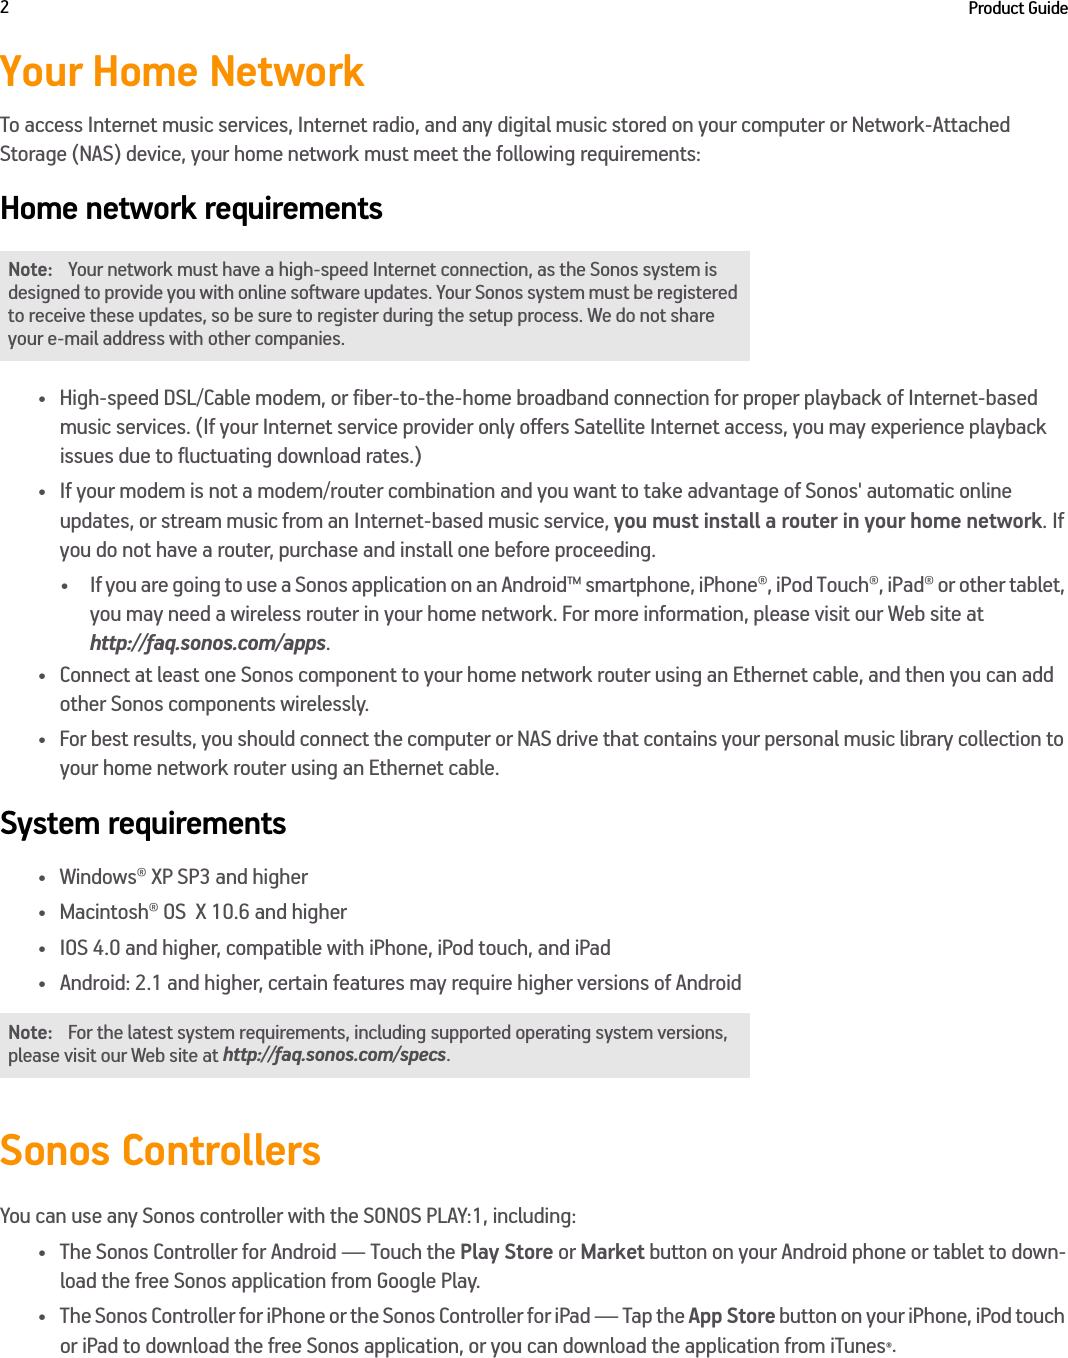 Product Guide2Your Home NetworkTo access Internet music services, Internet radio, and any digital music stored on your computer or Network-Attached Storage (NAS) device, your home network must meet the following requirements:Home network requirements• High-speed DSL/Cable modem, or fiber-to-the-home broadband connection for proper playback of Internet-based  music services. (If your Internet service provider only offers Satellite Internet access, you may experience playback  issues due to fluctuating download rates.)• If your modem is not a modem/router combination and you want to take advantage of Sonos&apos; automatic online  updates, or stream music from an Internet-based music service, you must install a router in your home network. If you do not have a router, purchase and install one before proceeding.• If you are going to use a Sonos application on an Android™ smartphone, iPhone®, iPod Touch®, iPad® or other tablet, you may need a wireless router in your home network. For more information, please visit our Web site at  http://faq.sonos.com/apps.• Connect at least one Sonos component to your home network router using an Ethernet cable, and then you can add other Sonos components wirelessly.• For best results, you should connect the computer or NAS drive that contains your personal music library collection to your home network router using an Ethernet cable. System requirements• Windows® XP SP3 and higher • Macintosh® OS  X 10.6 and higher• IOS 4.0 and higher, compatible with iPhone, iPod touch, and iPad•Android: 2.1 and higher, certain features may require higher versions of Android Sonos ControllersYou can use any Sonos controller with the SONOS PLAY:1, including:• The Sonos Controller for Android — Touch the Play Store or Market button on your Android phone or tablet to down-load the free Sonos application from Google Play.• The Sonos Controller for iPhone or the Sonos Controller for iPad — Tap the App Store button on your iPhone, iPod touch or iPad to download the free Sonos application, or you can download the application from iTunes®.  Note: Your network must have a high-speed Internet connection, as the Sonos system is designed to provide you with online software updates. Your Sonos system must be registered to receive these updates, so be sure to register during the setup process. We do not share your e-mail address with other companies.Note: For the latest system requirements, including supported operating system versions, please visit our Web site at http://faq.sonos.com/specs.